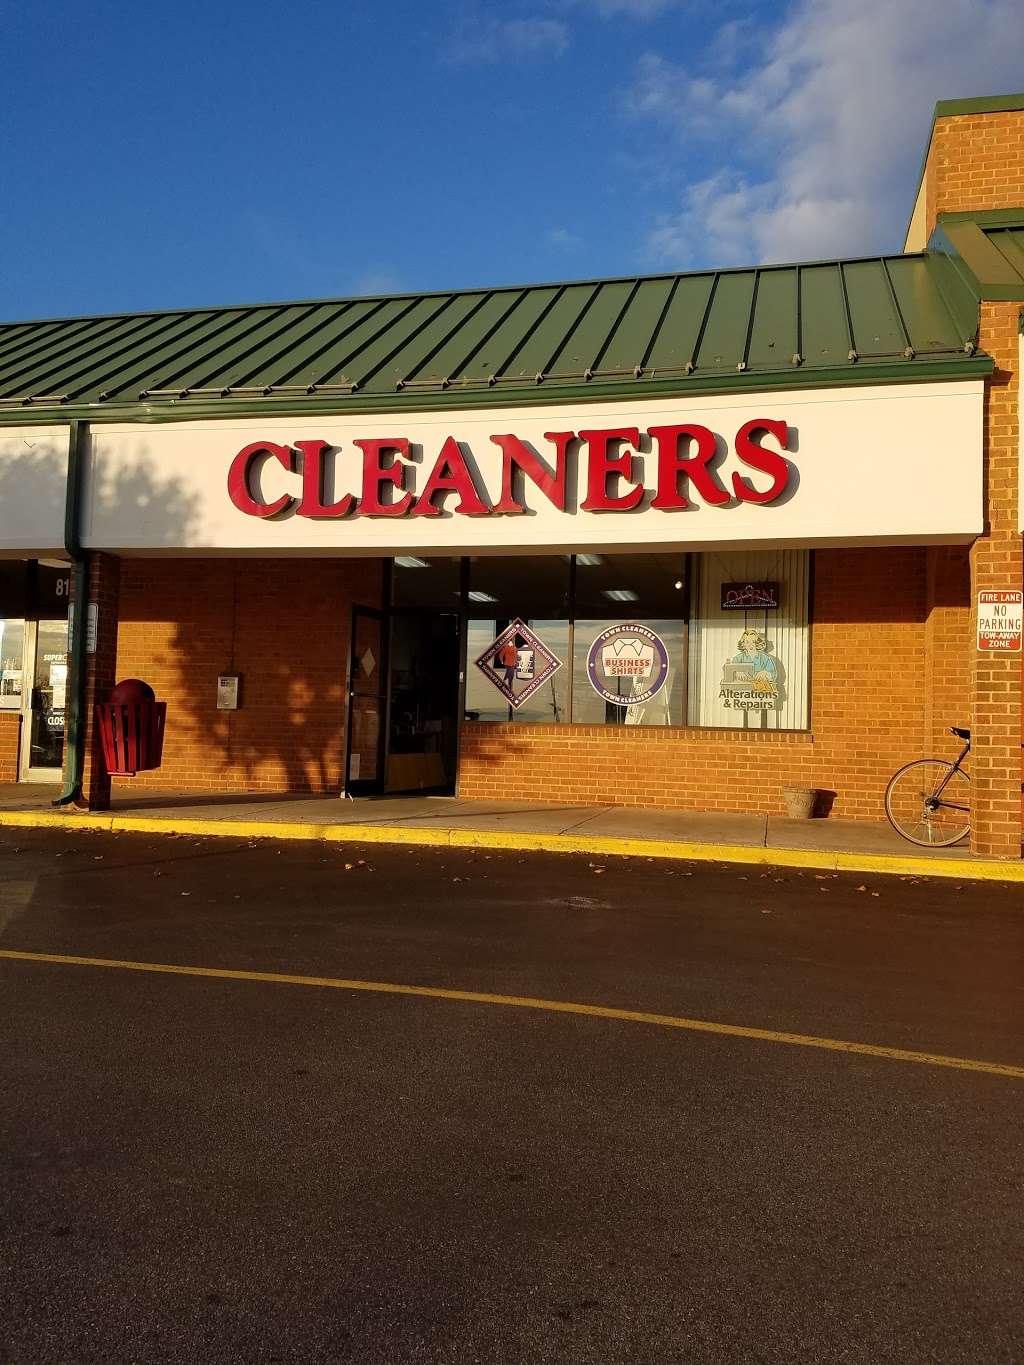 Town Cleaners | Photo 1 of 2 | Address: 813 E Main St, Middletown, MD 21769, USA | Phone: (301) 371-9336